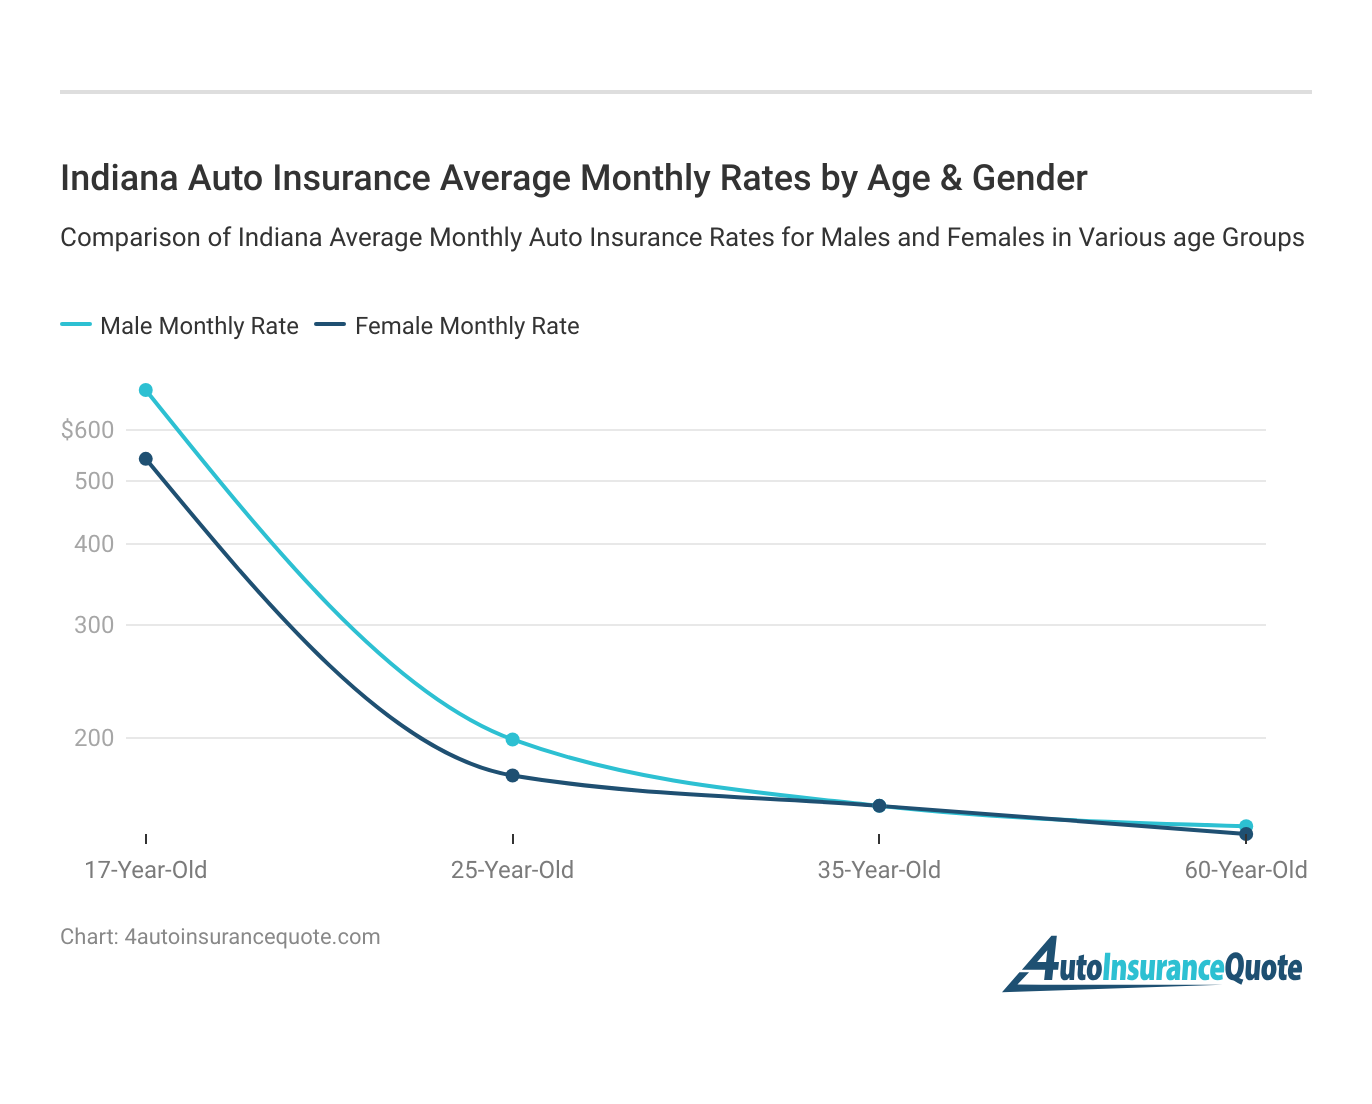 <h3>Indiana Auto Insurance Average Monthly Rates by Age & Gender</h3>